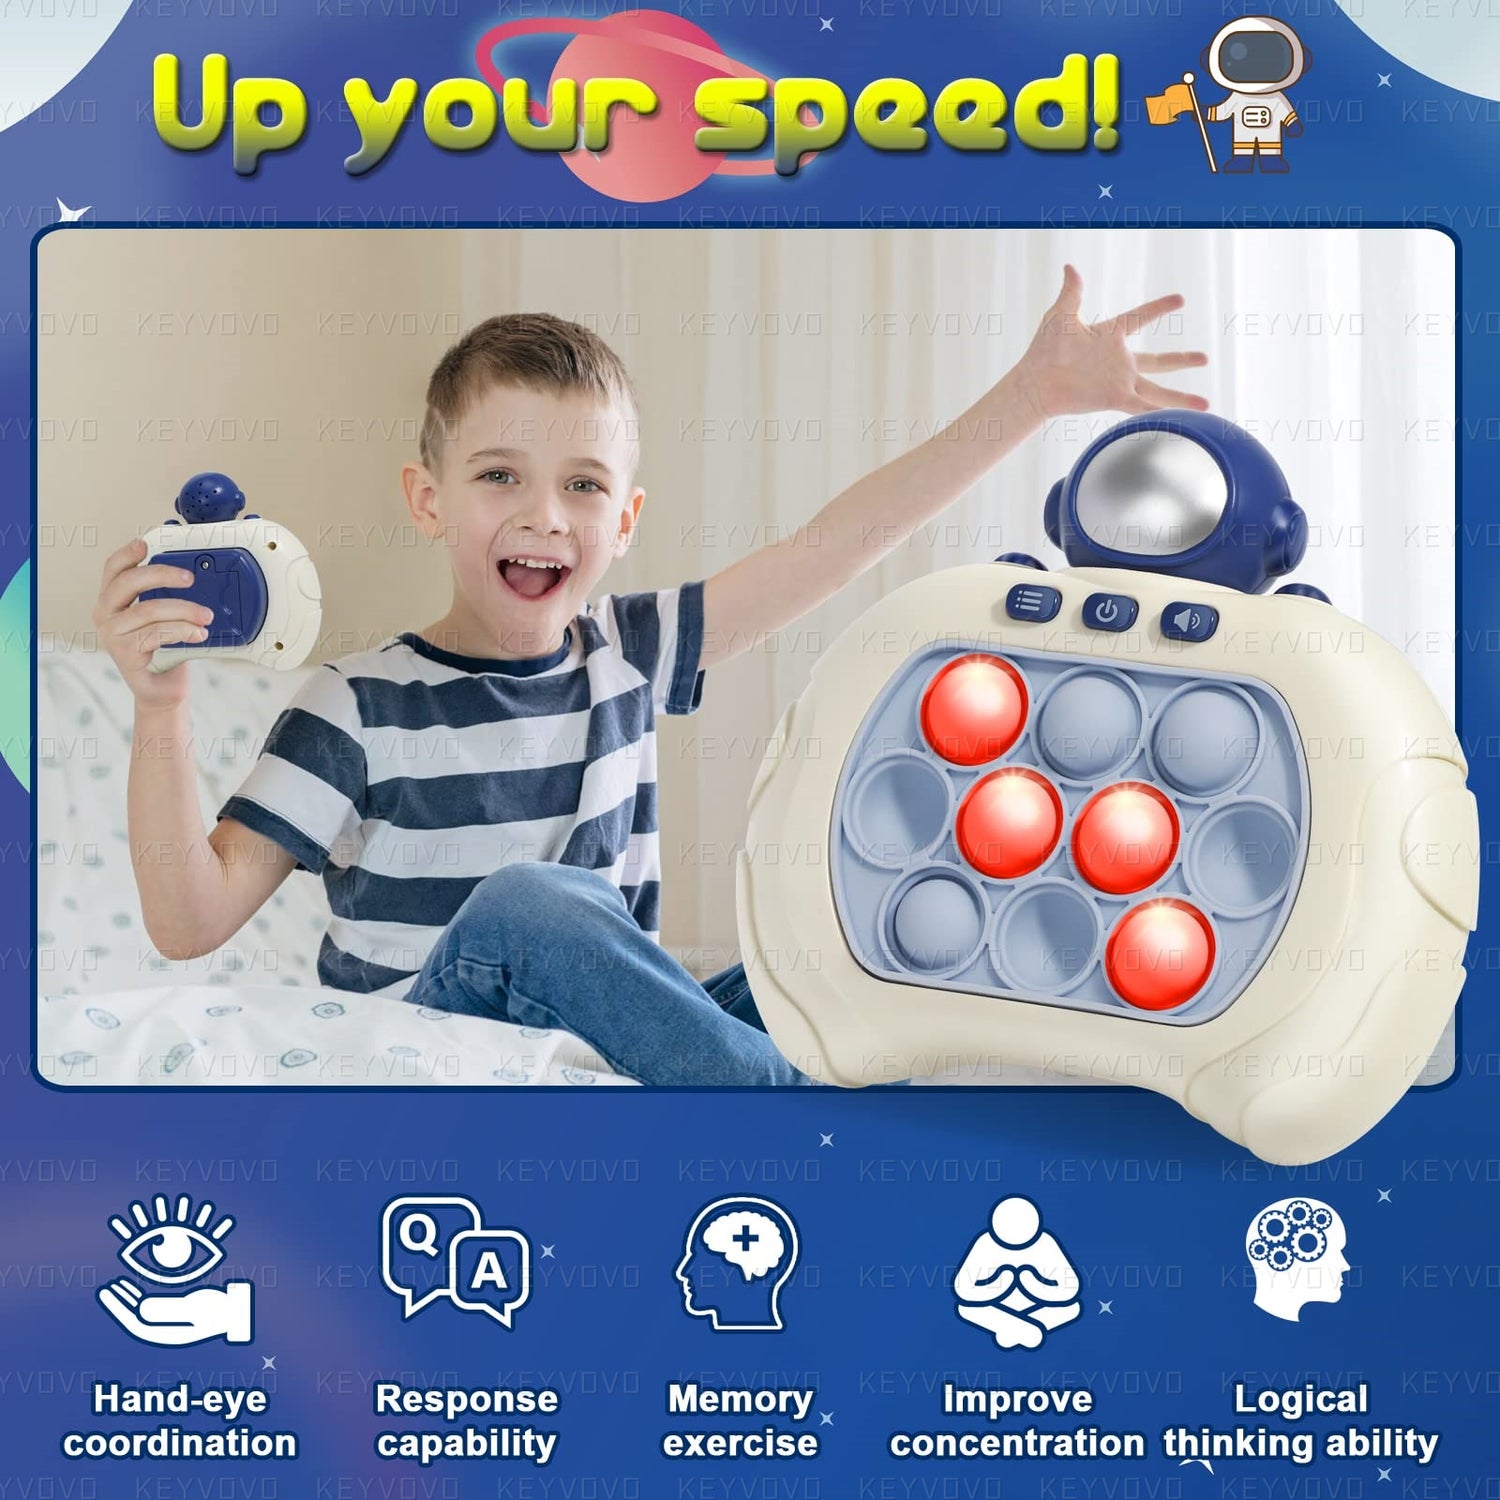 Interactive Push Pop Electronic Game: Handheld Console with Lights